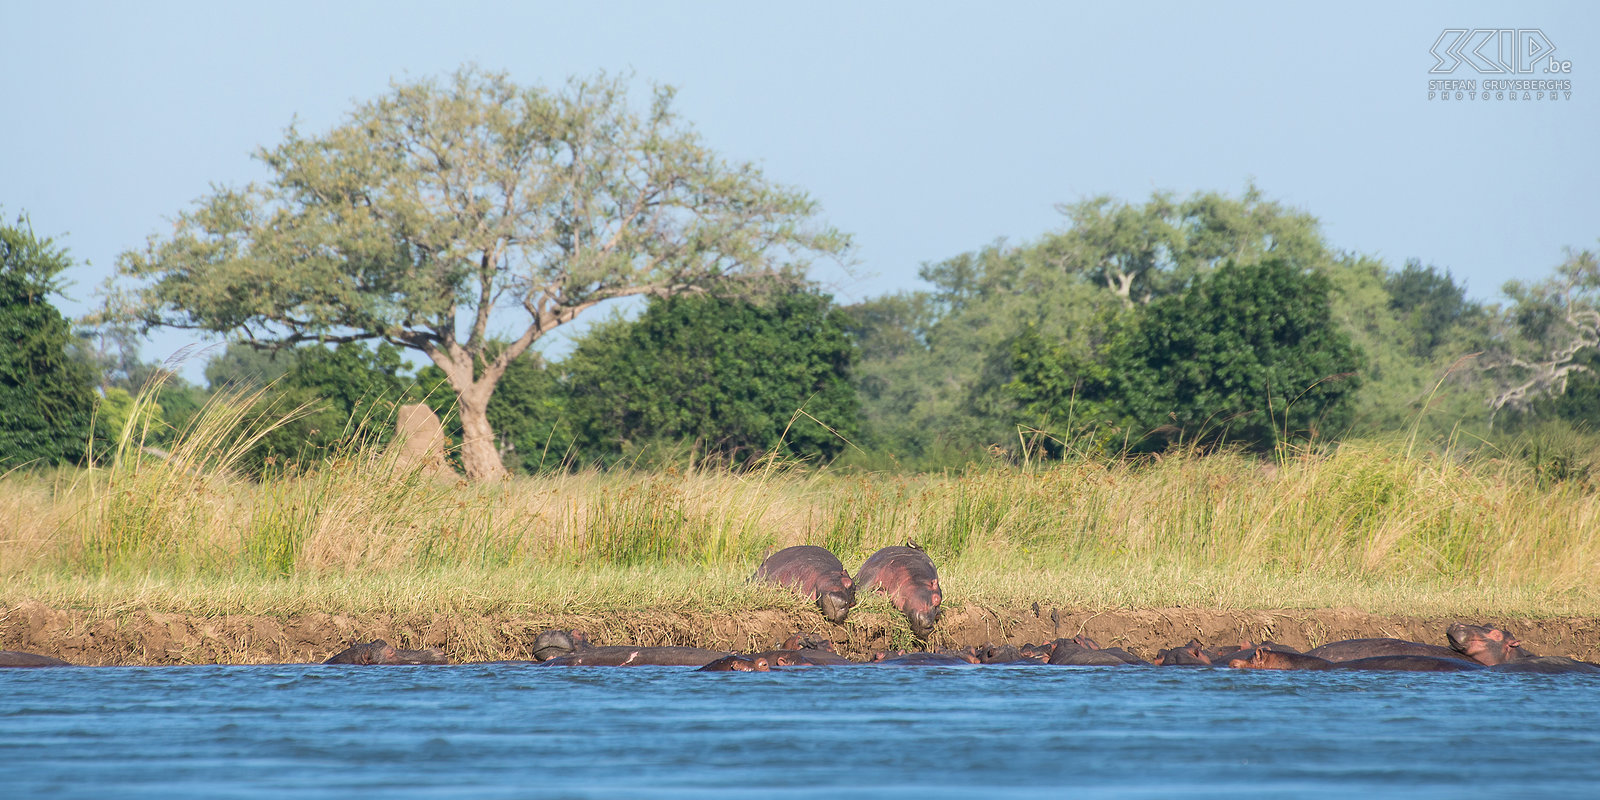 Lower Zambezi - Mana Pools - Hippos When we arrived at Mana Pools National Park at the Zimbabwean side we saw more mammals such as impalas and elephants and of course there were still many hippos. Stefan Cruysberghs